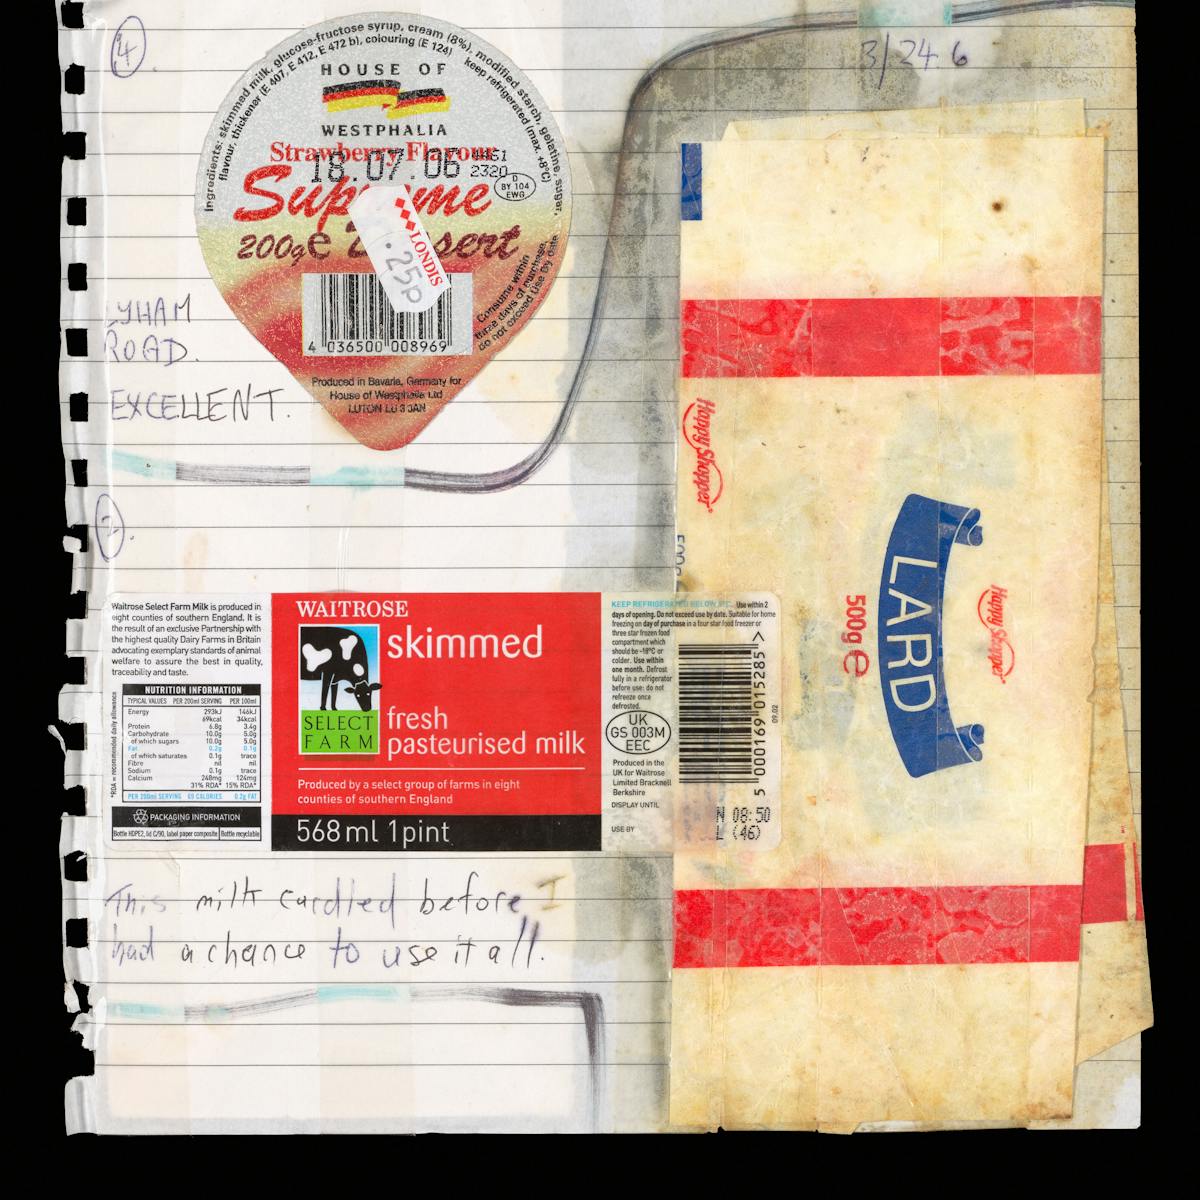 Photograph of a scrapbook page that has been soiled with the grease of the packaging pasted within it.  The packaging of a strawberry flavour desert, pasteurised milk and lard are all pasted inside.  Handwritten annotations read "Lyham Road, excellent" and "This milk curdled before I had a chance to use it all"